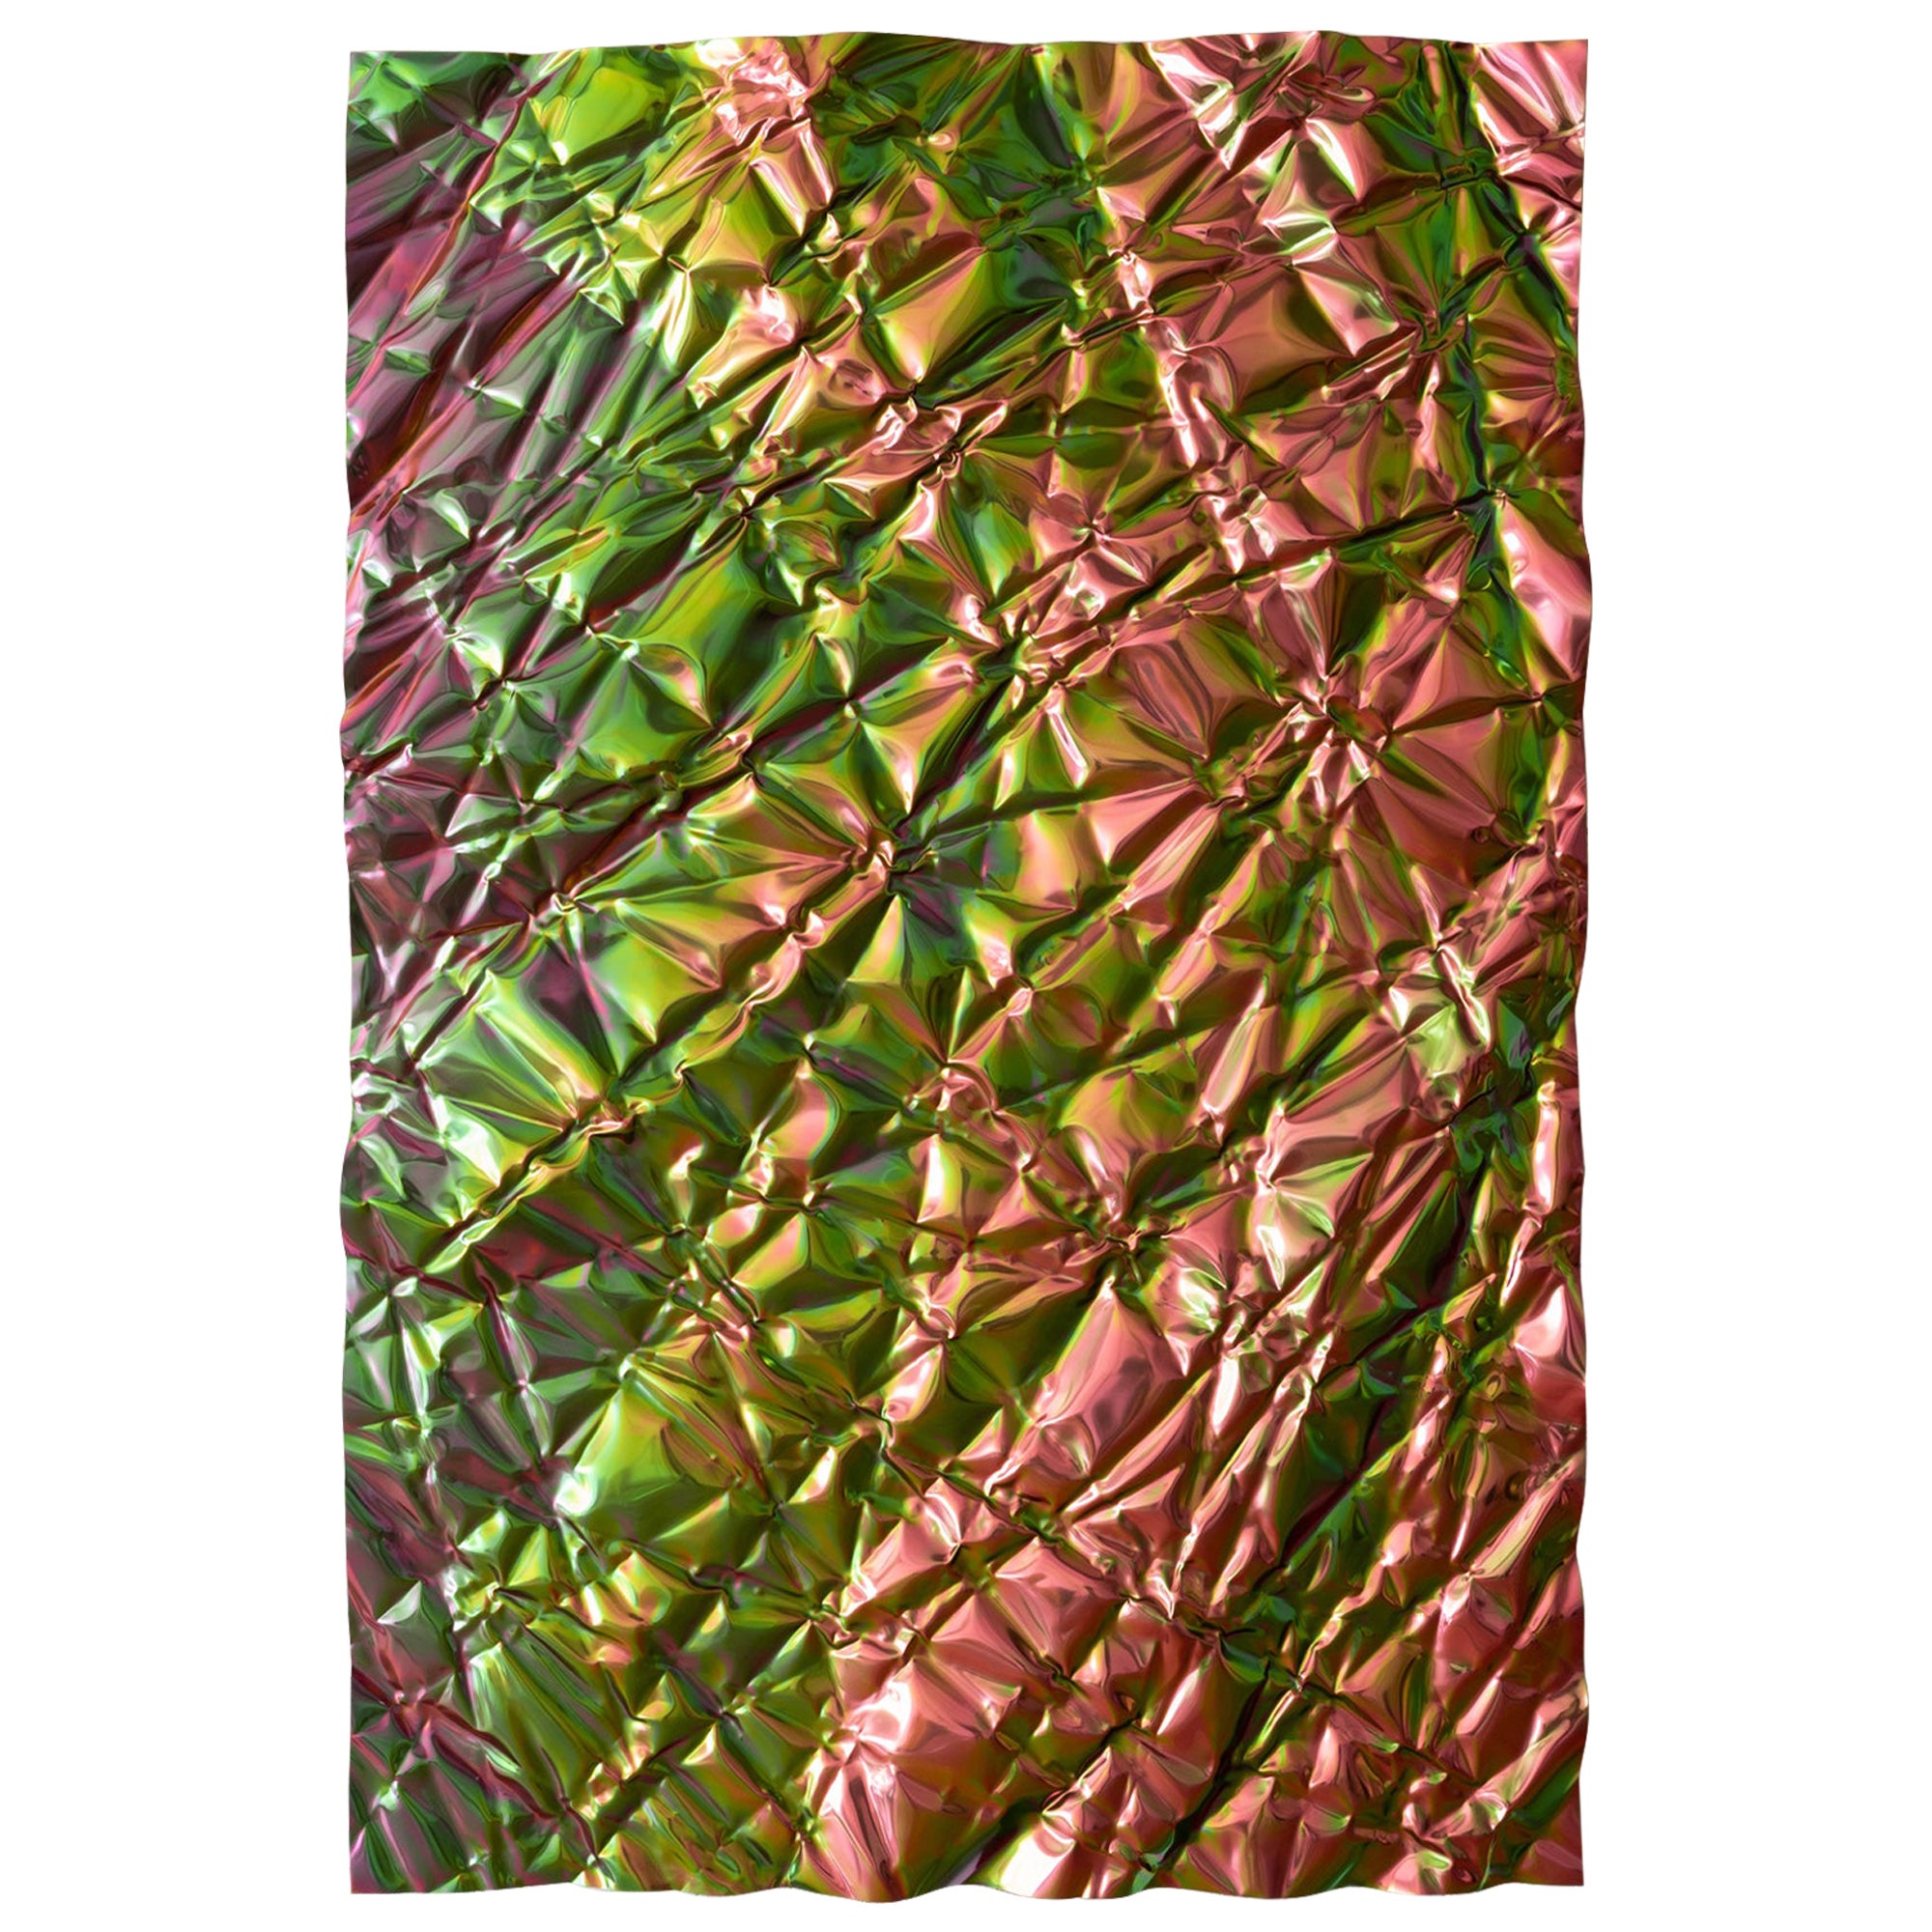 Christopher Prinz “Wrinkled Panel” in Polished Rainbow Iridescent